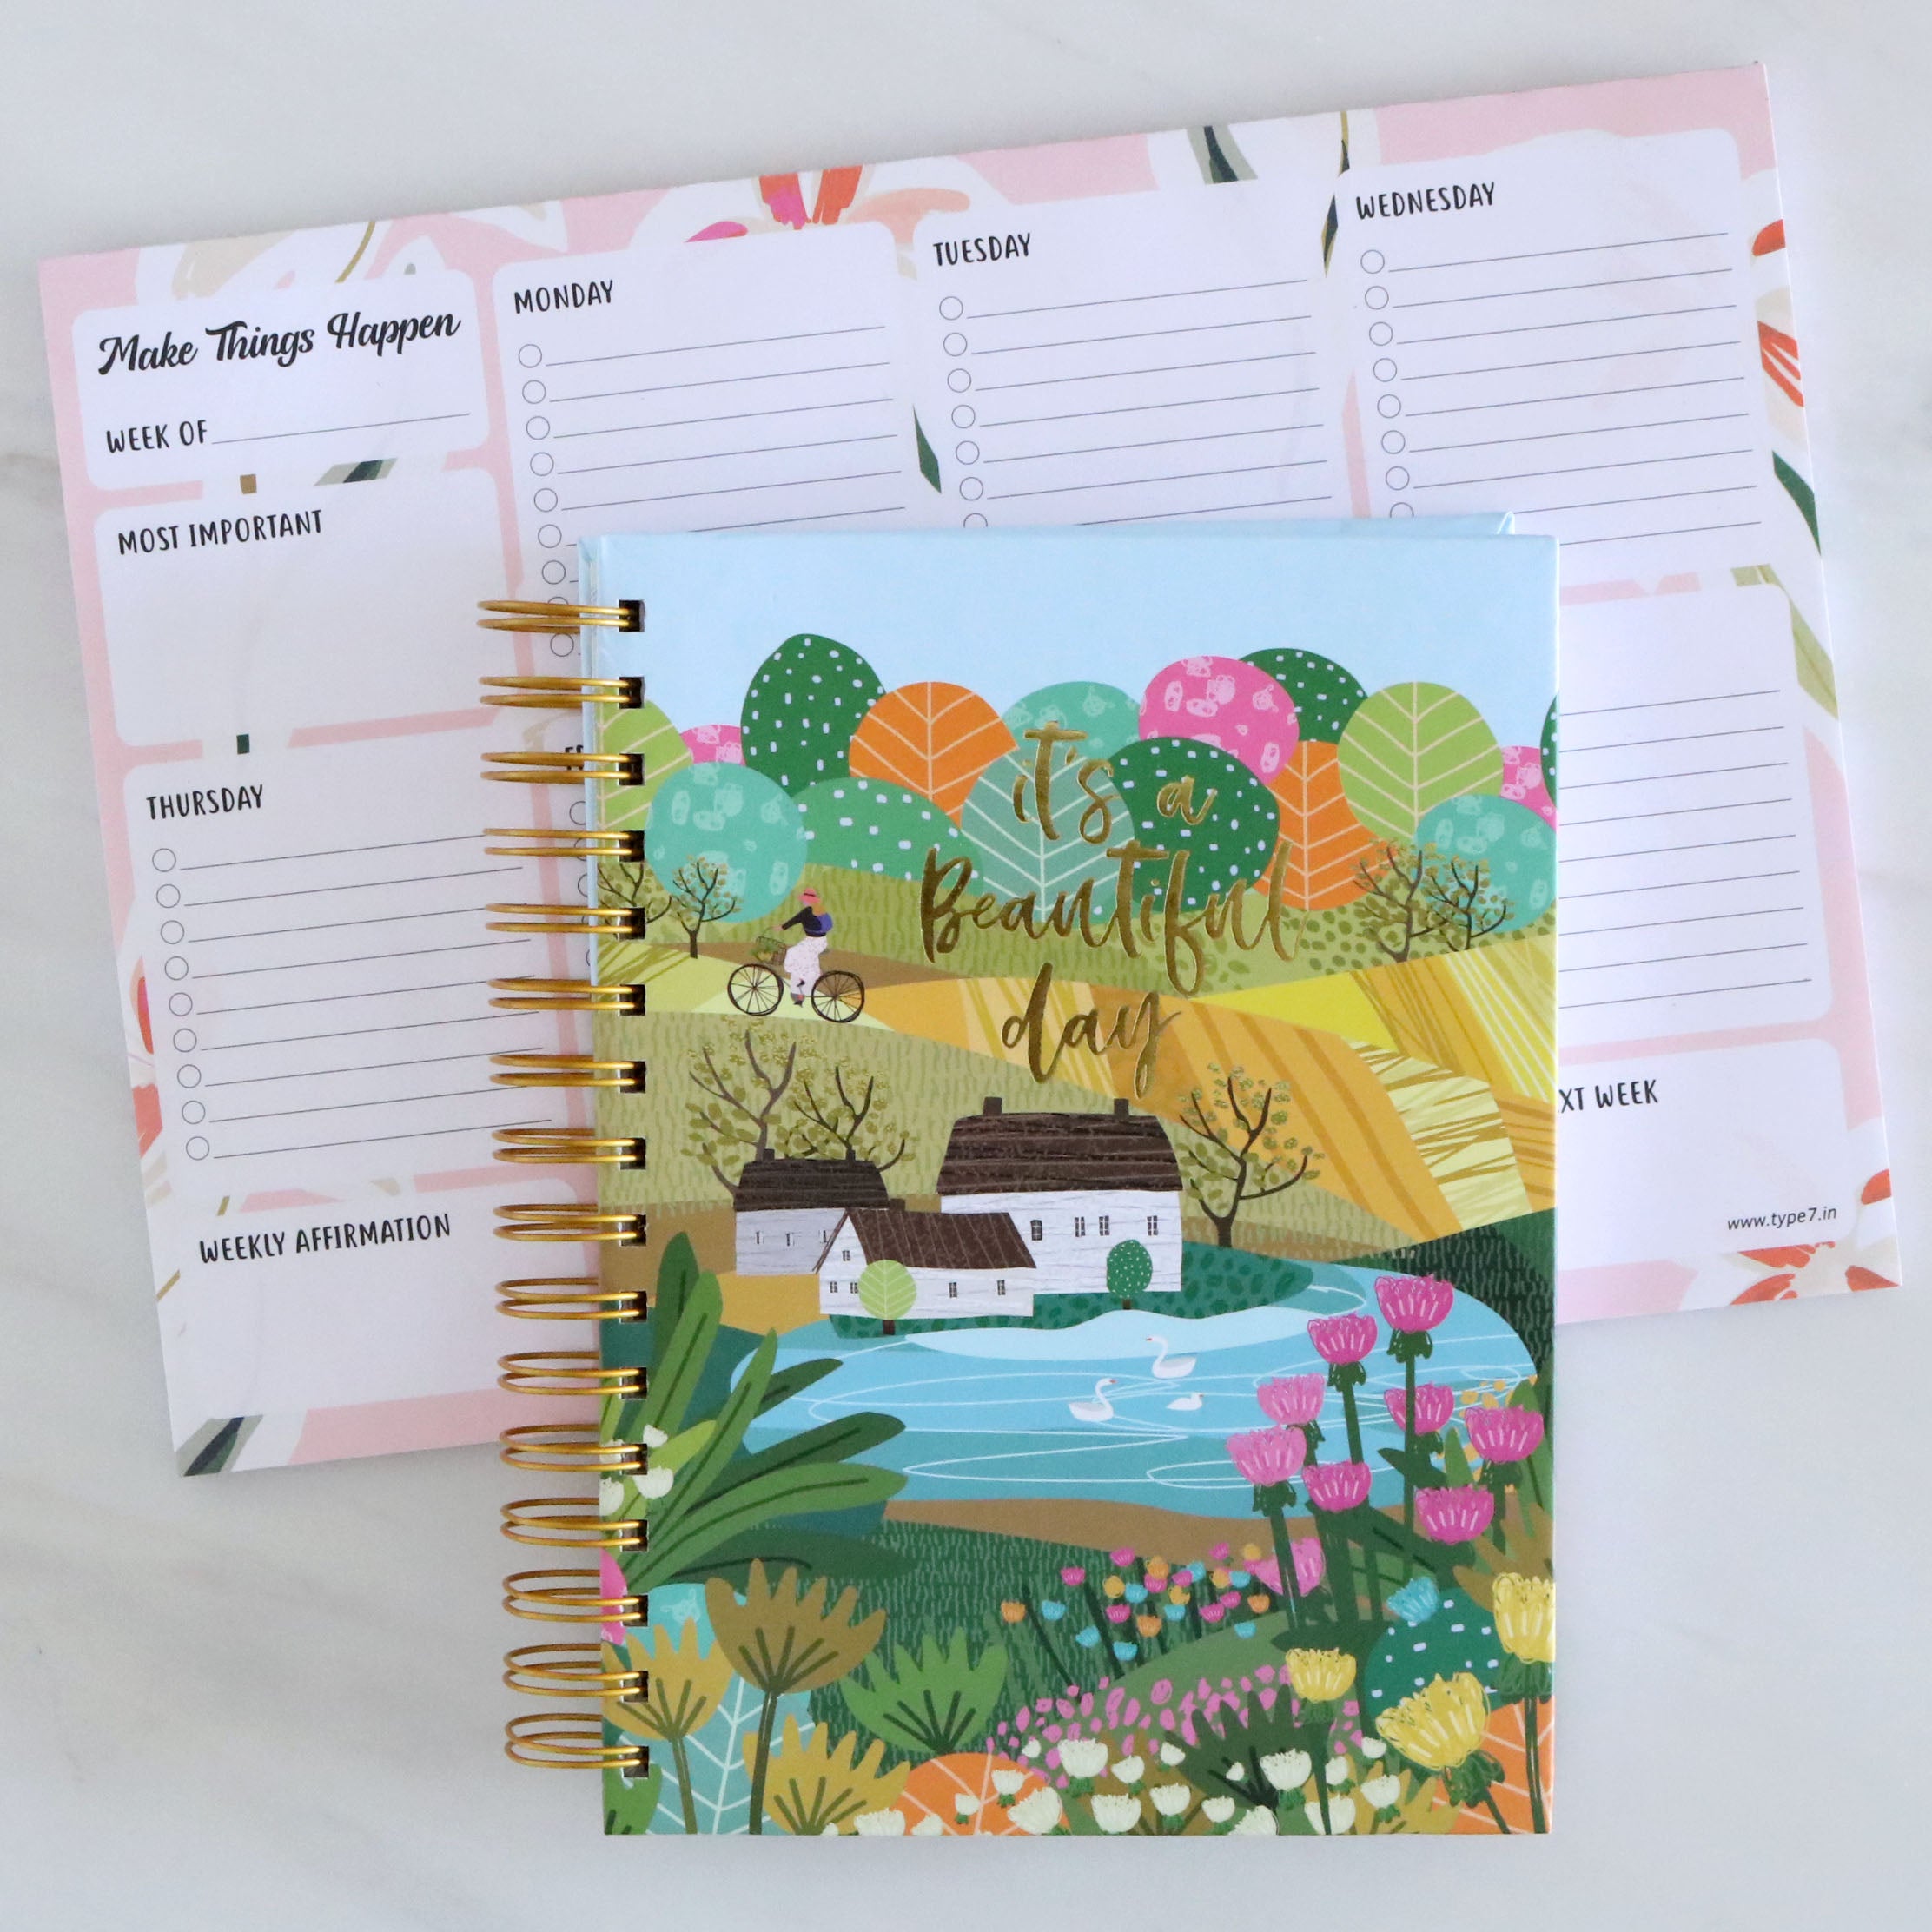 It's A Beautiful Day Daily Planner & Weekly Planner Combo